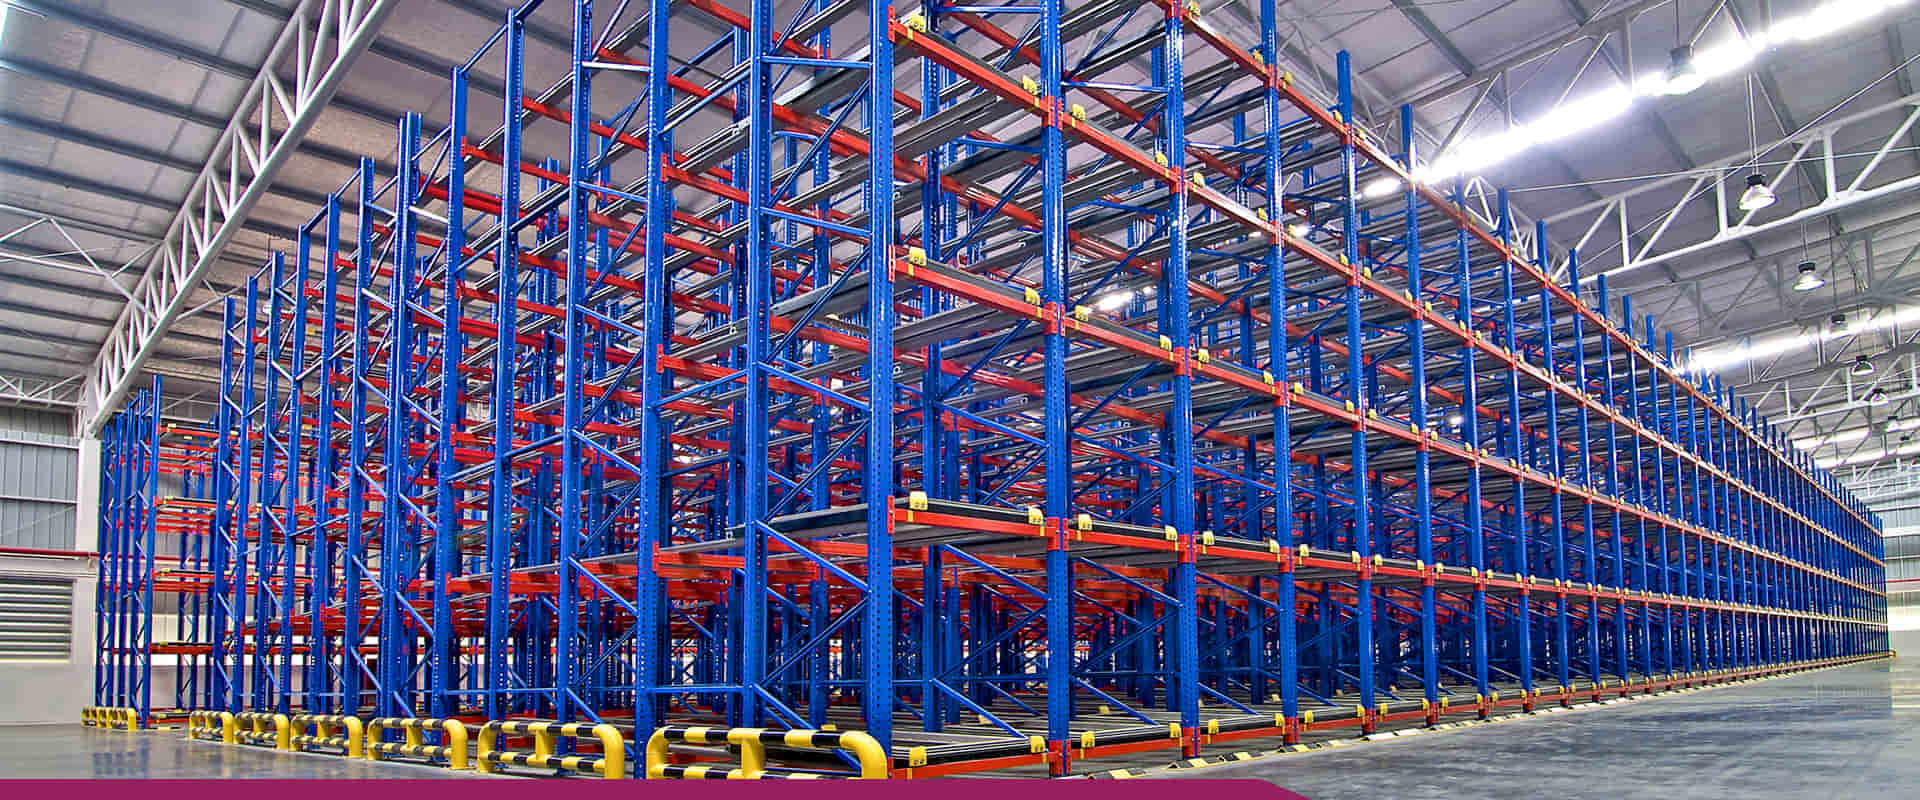 India’s Top Warehouse And Industrial Storage Racks Manufacturer In Jodhpur